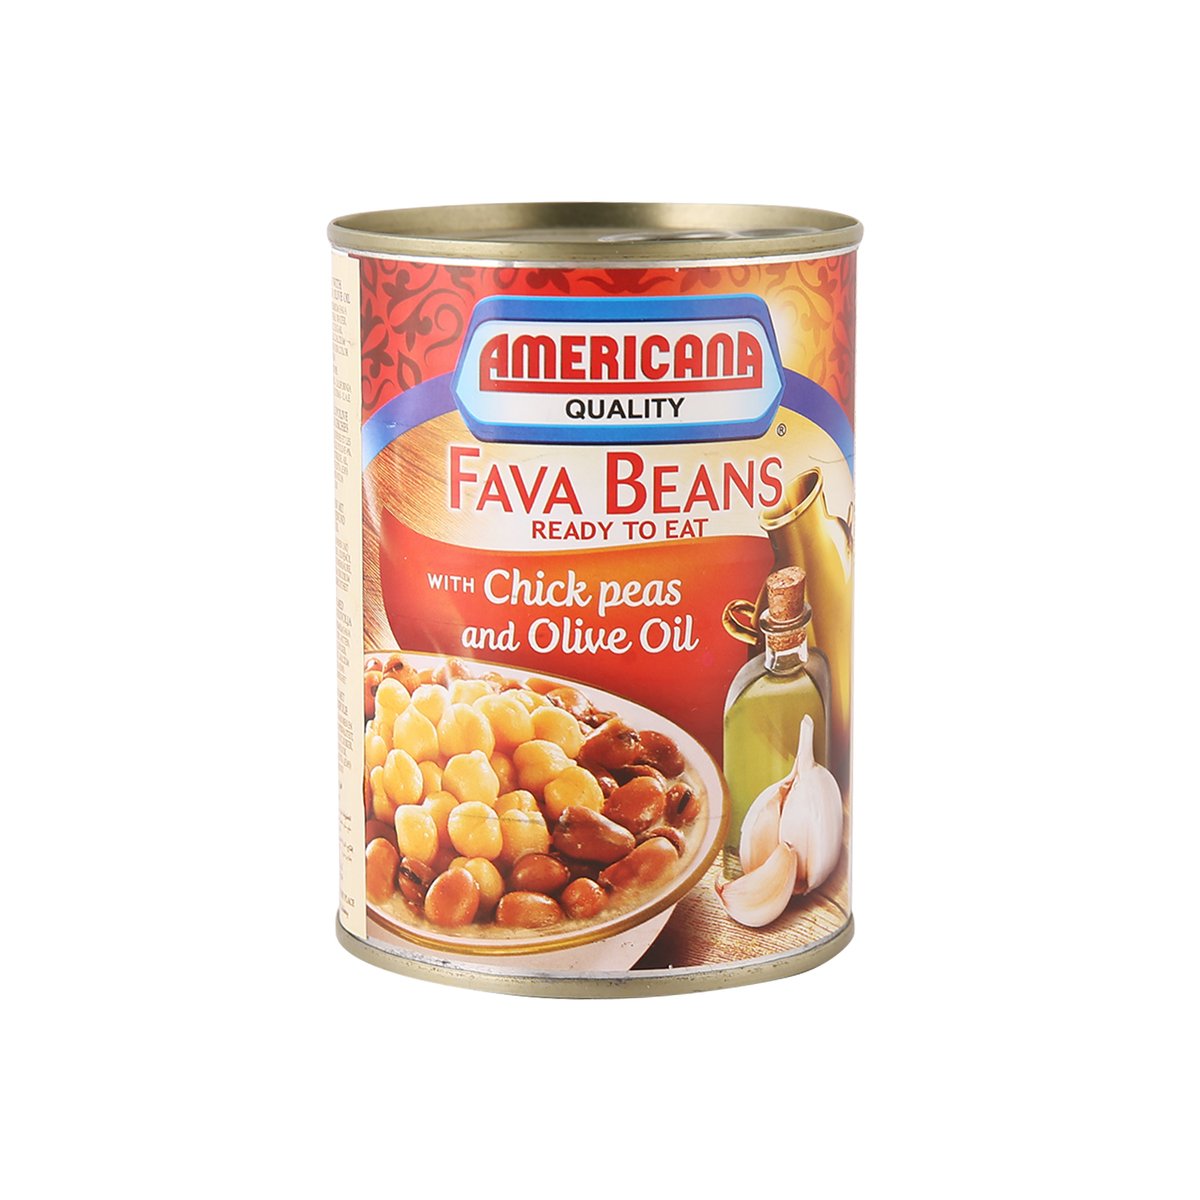 Americana Fava Beans with Chick Peas and Olive Oil 400 g